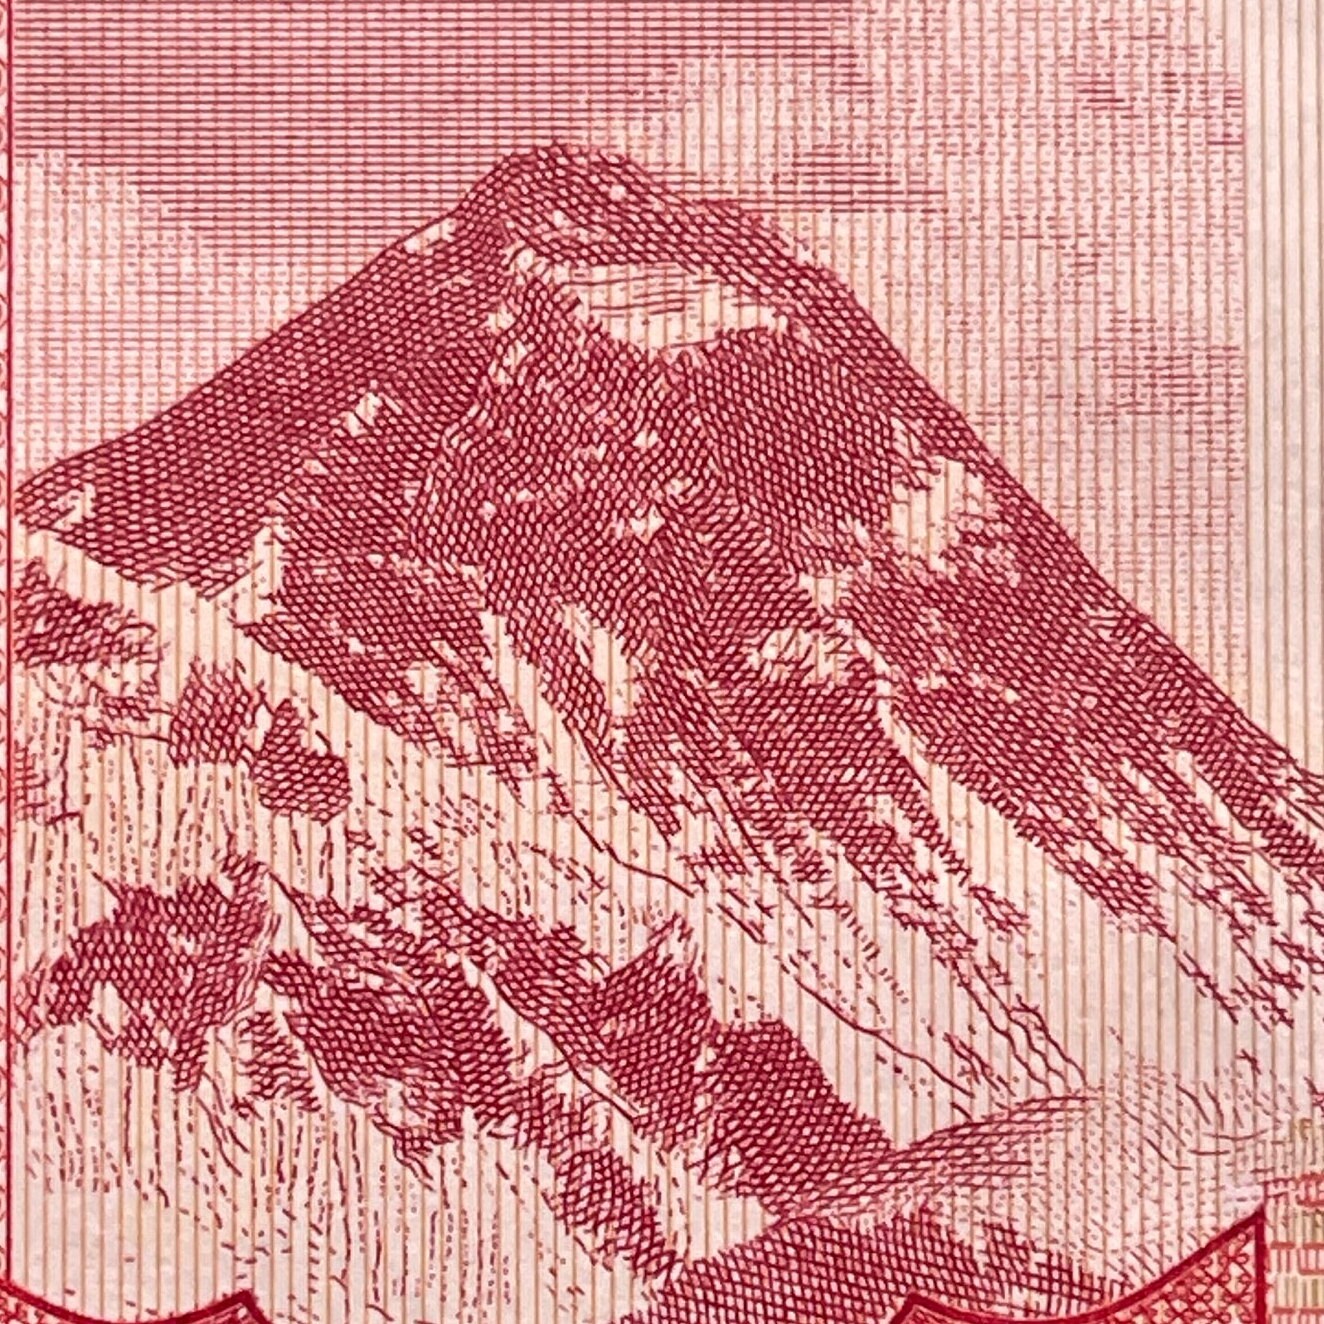 Wild Yak, Mount Everest, Kasthampandap Temple & Rhododendron 5 Rupees Nepal Authentic Banknote Money for Jewelry and Collage (Sagarmāthā)